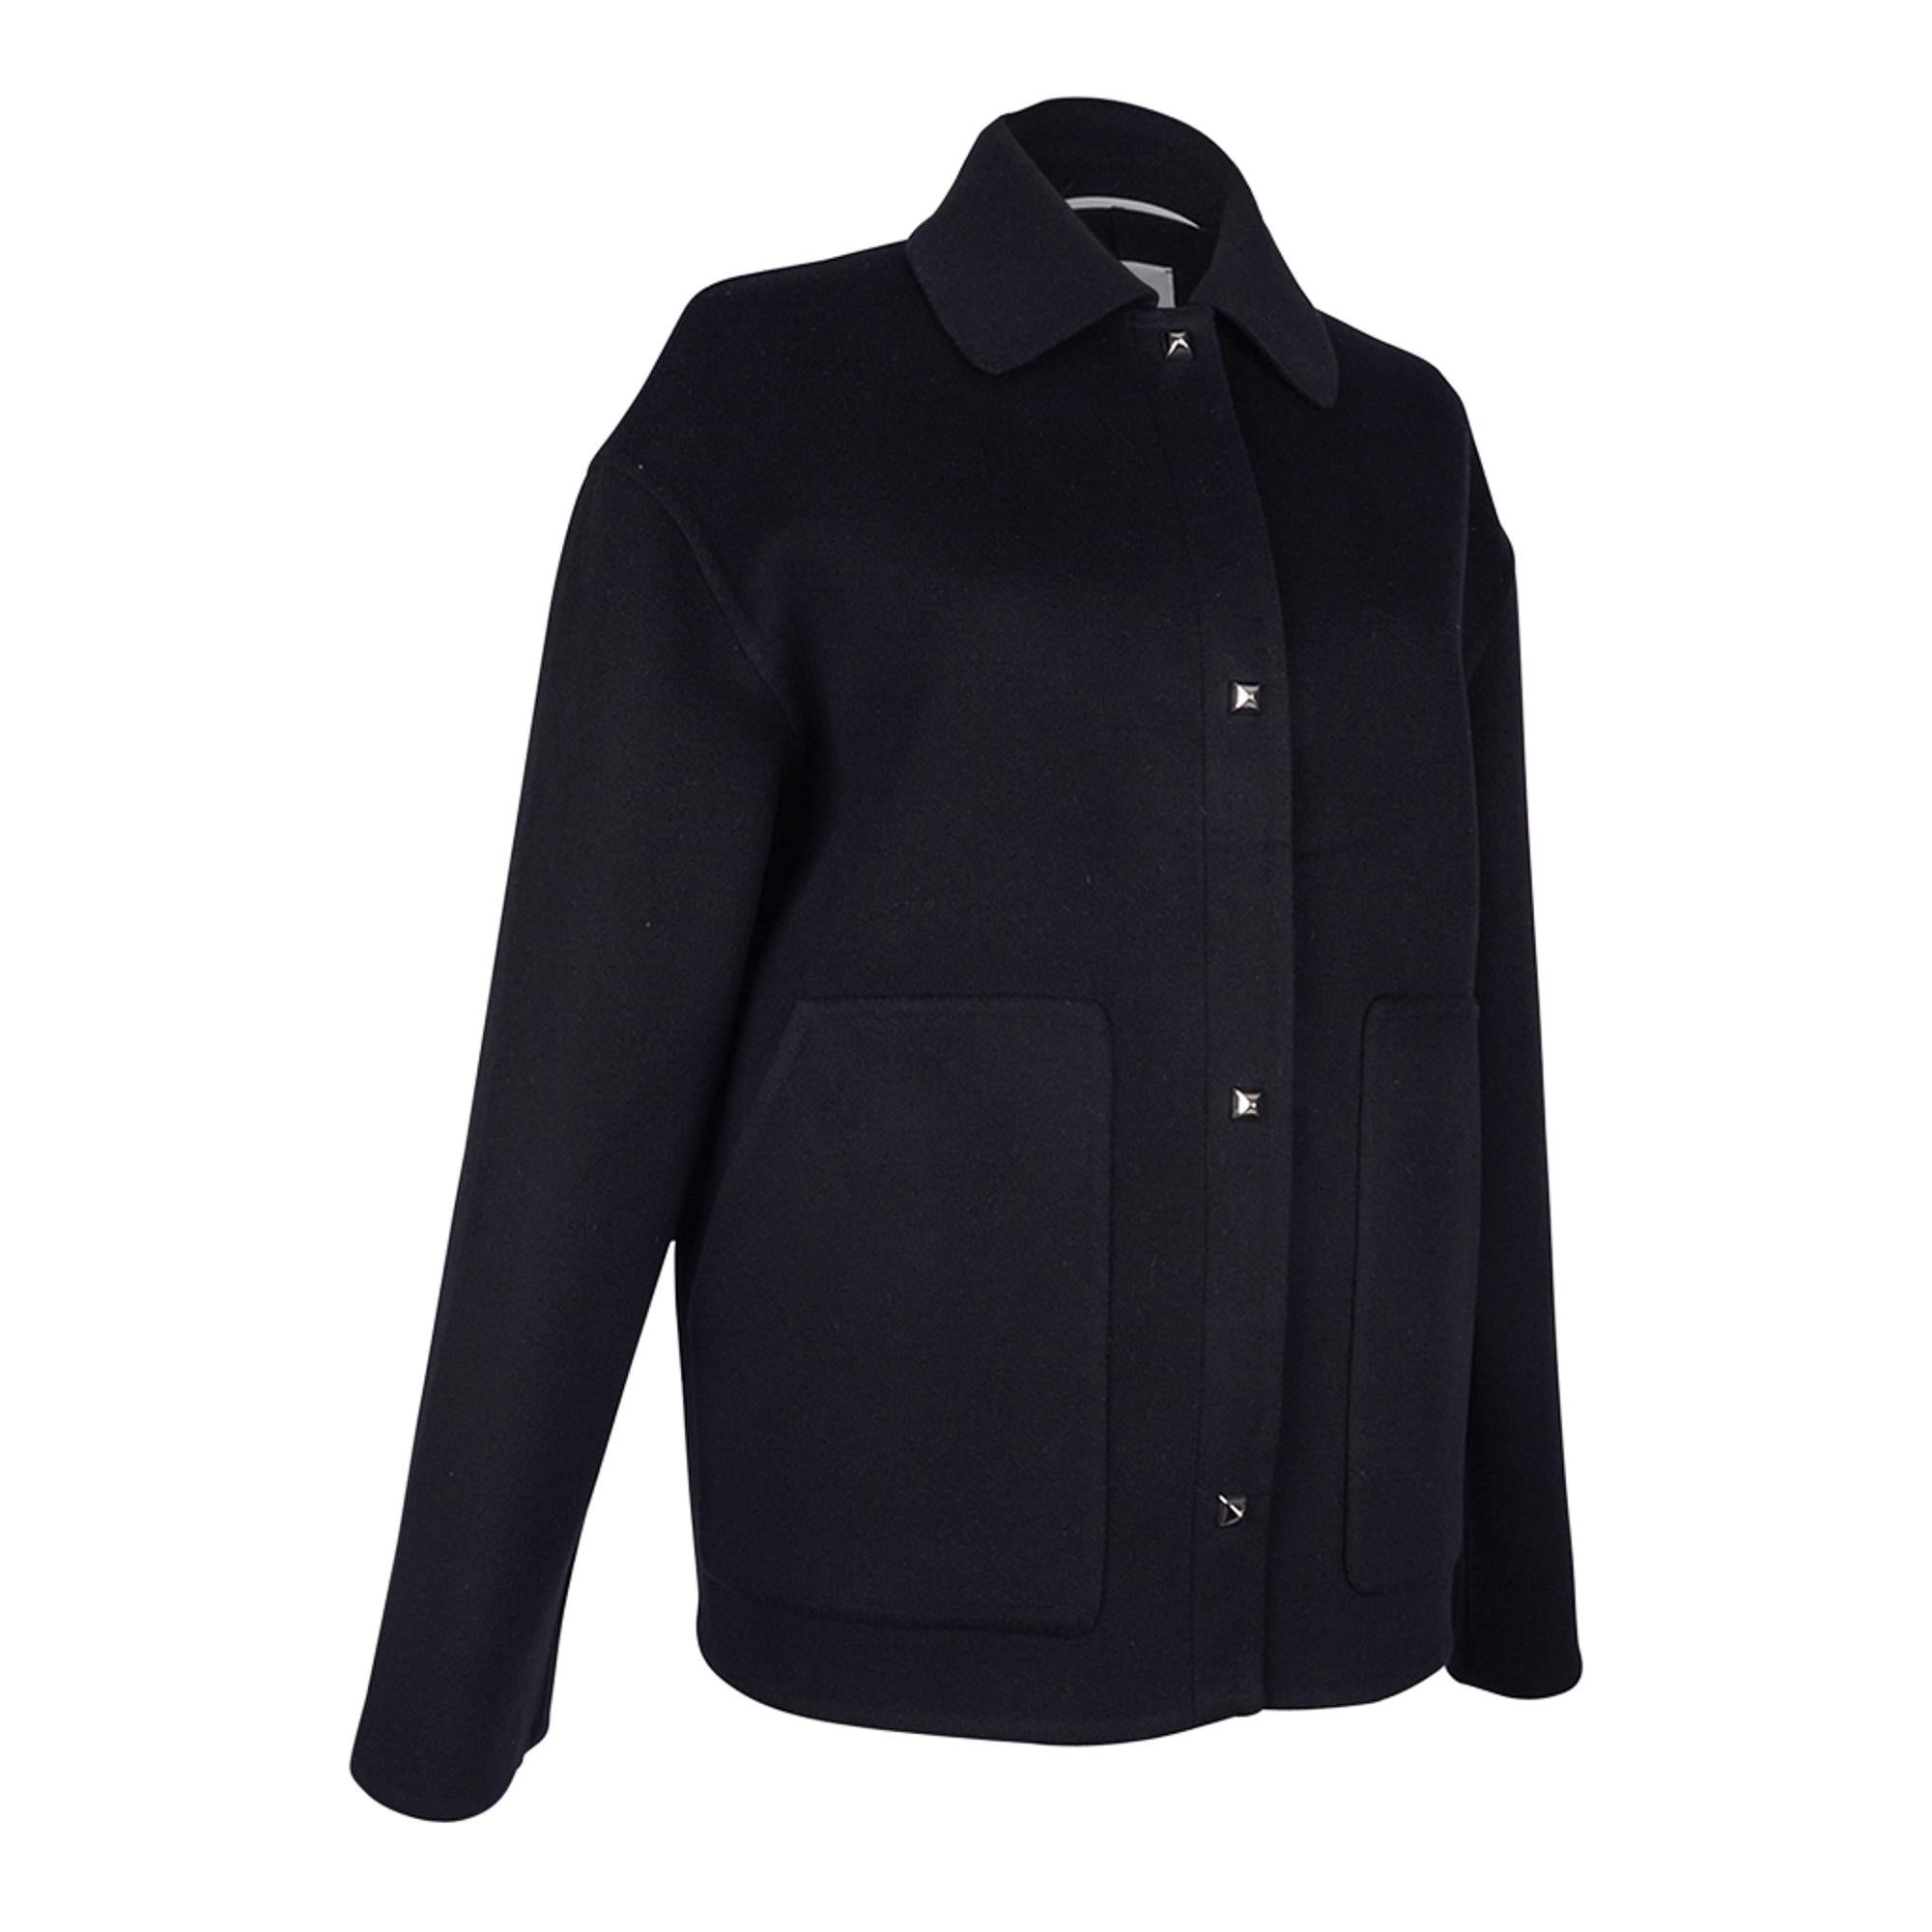 Mightychic offers an Hermes jacket featured in Black double sided Cashmere.
Sleek straight cut with Palladium plated Medor snap closures.
Timeless classic.
Snaps are reinforced with lambskin leather interior trim.
Drop Shoulder.
Two (2) front patch